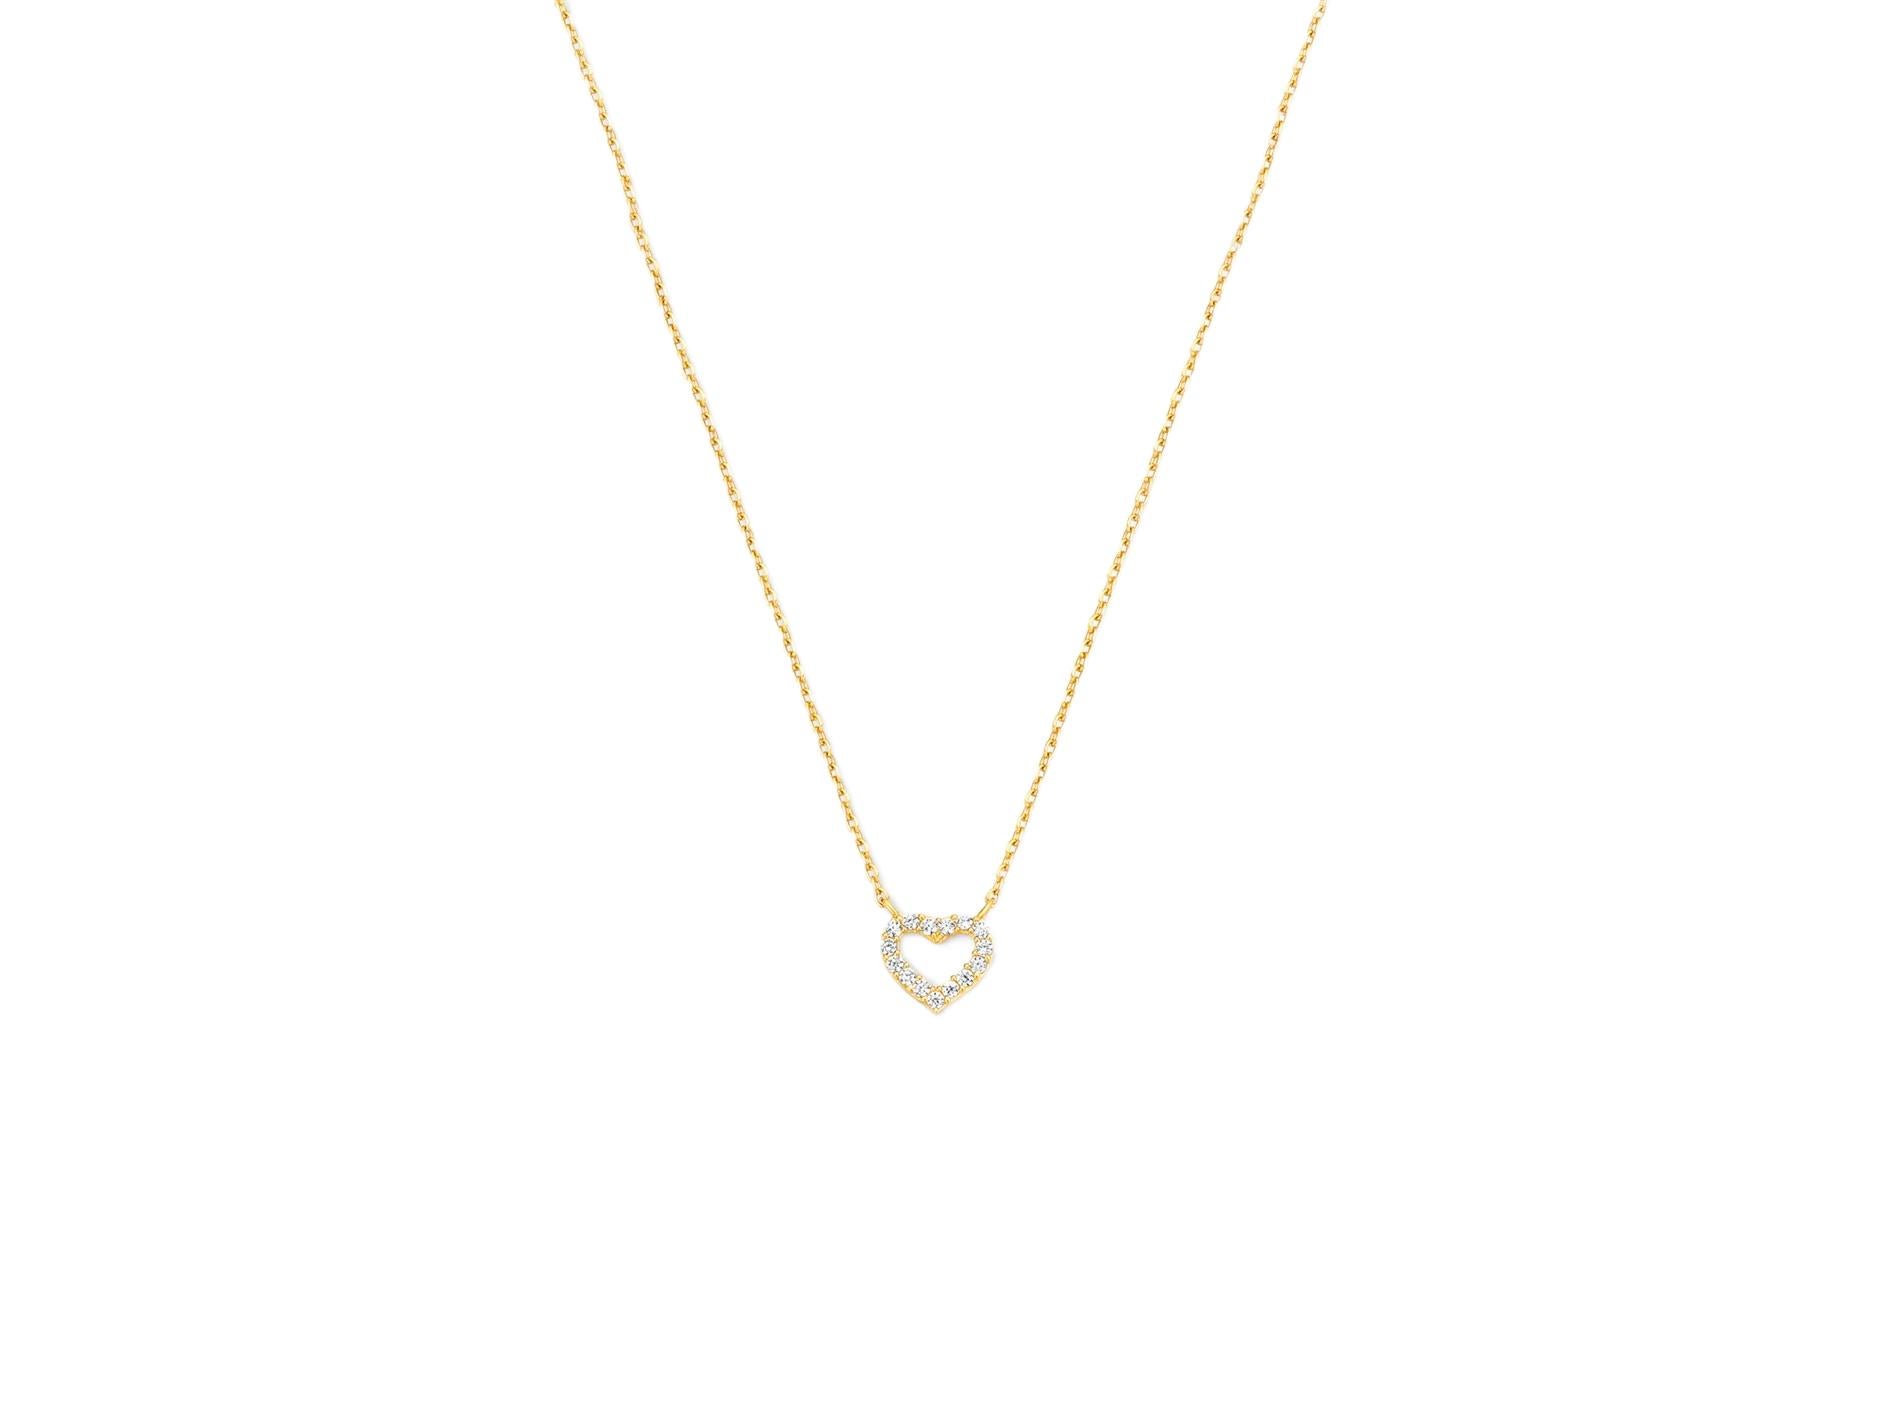 Modern 14k Solid Gold Heart Pendant Necklace, Tiny Heart Charm Gold Chain Necklace